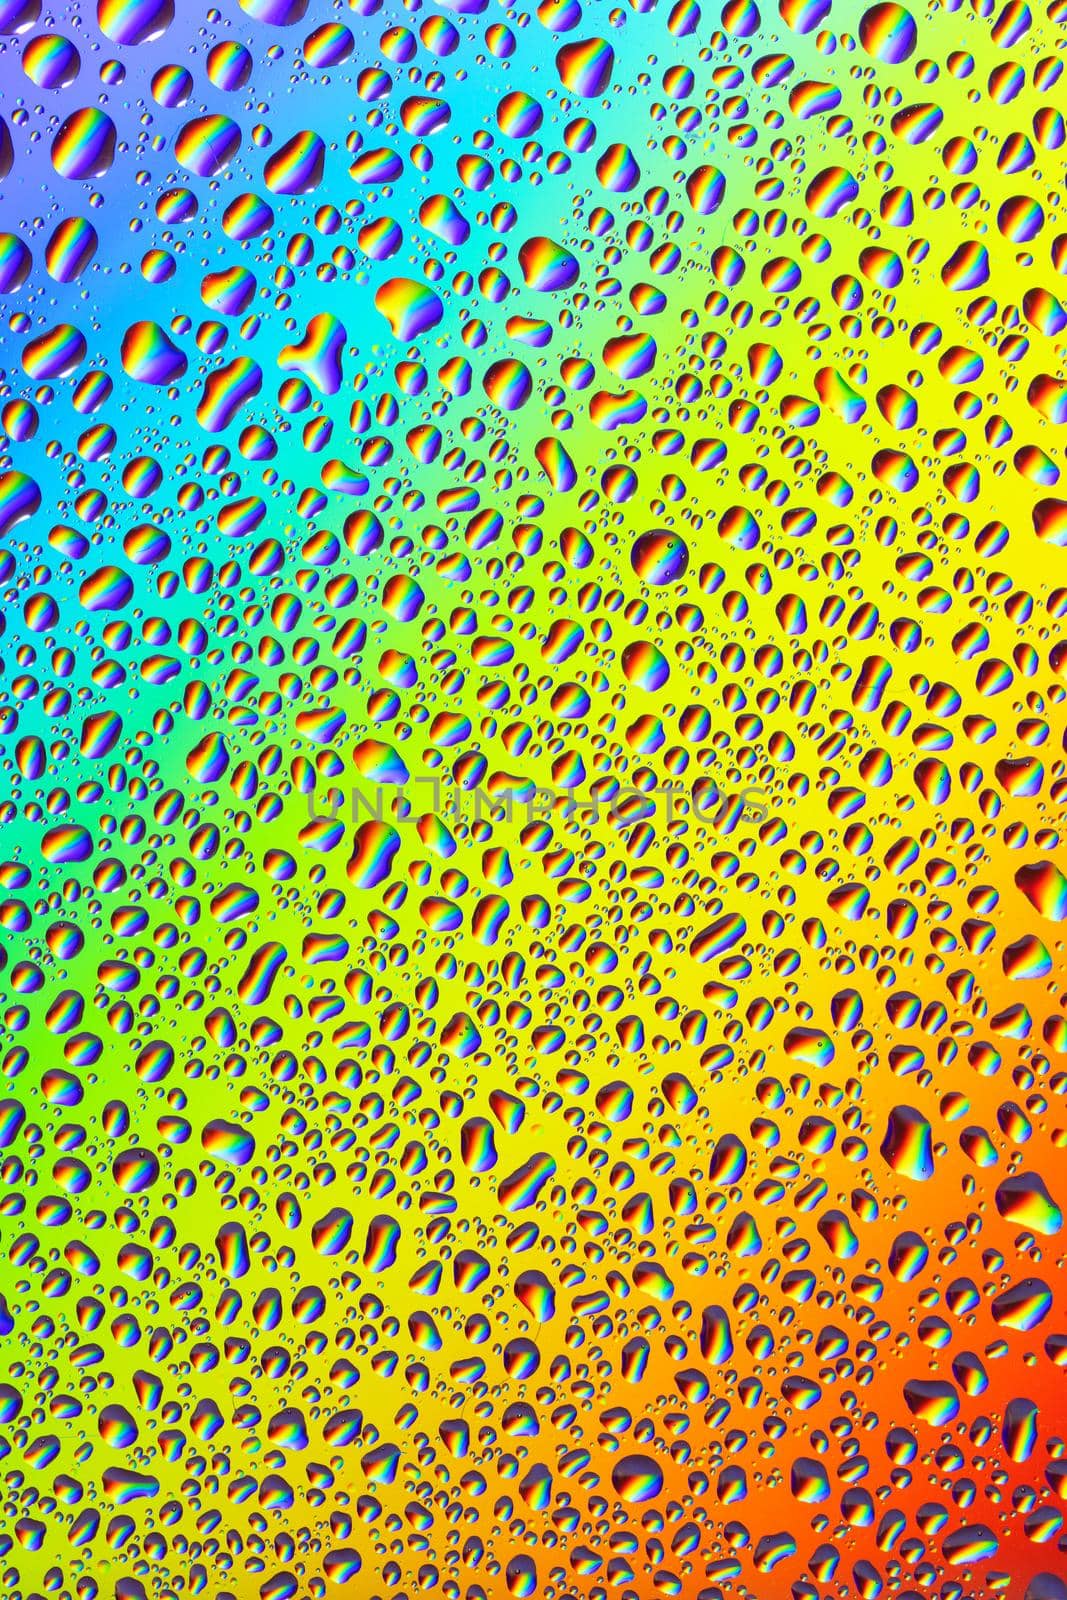 Water drops on a bright rainbow background and the reflection of the rainbow in them, close-up, high resolution, vertical image.